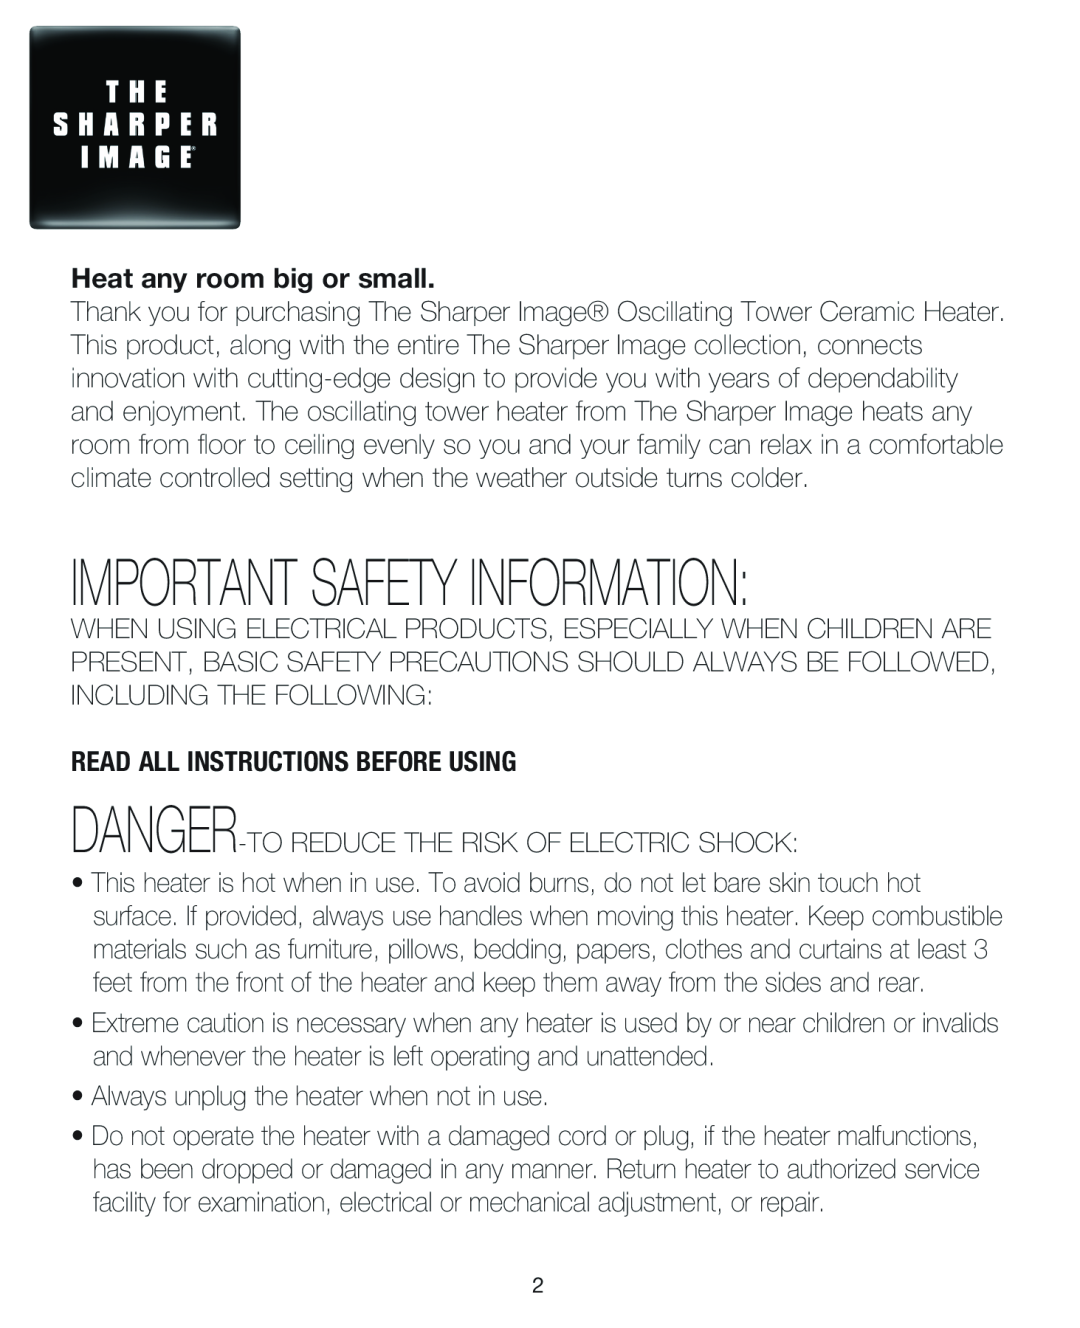 Sharper Image IB-EV-HT20 Important Safety Information, Heat any room big or small, Read All Instructions Before Using 